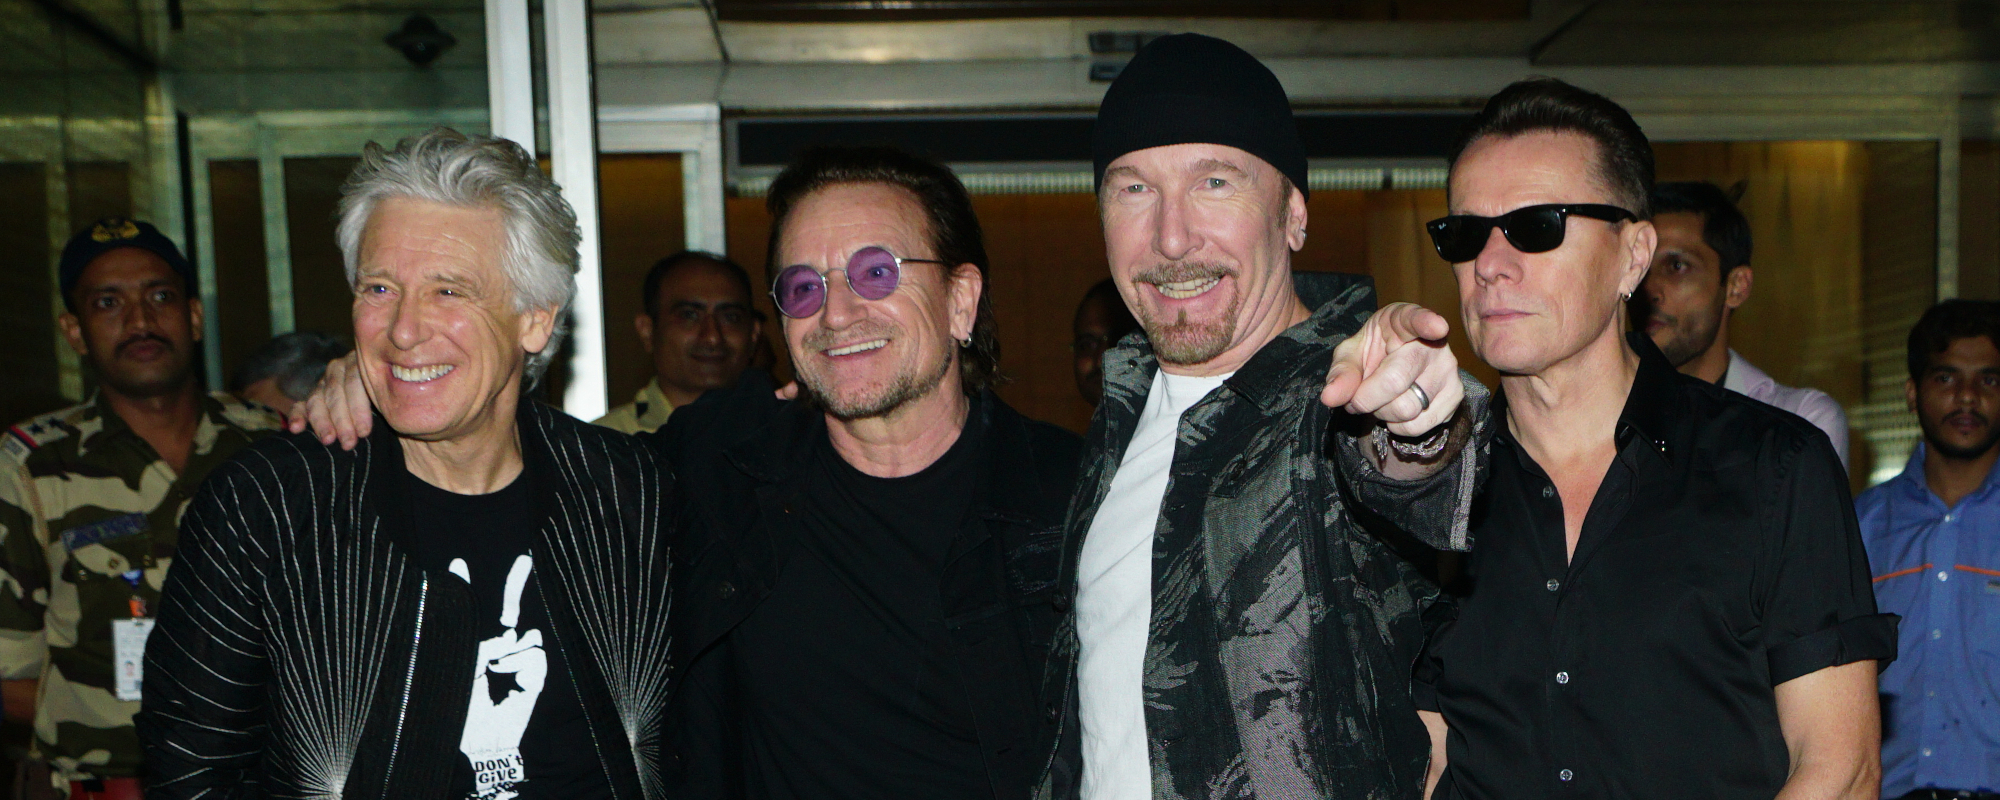 U2 to Release Album of Their Re-Imagined Classics